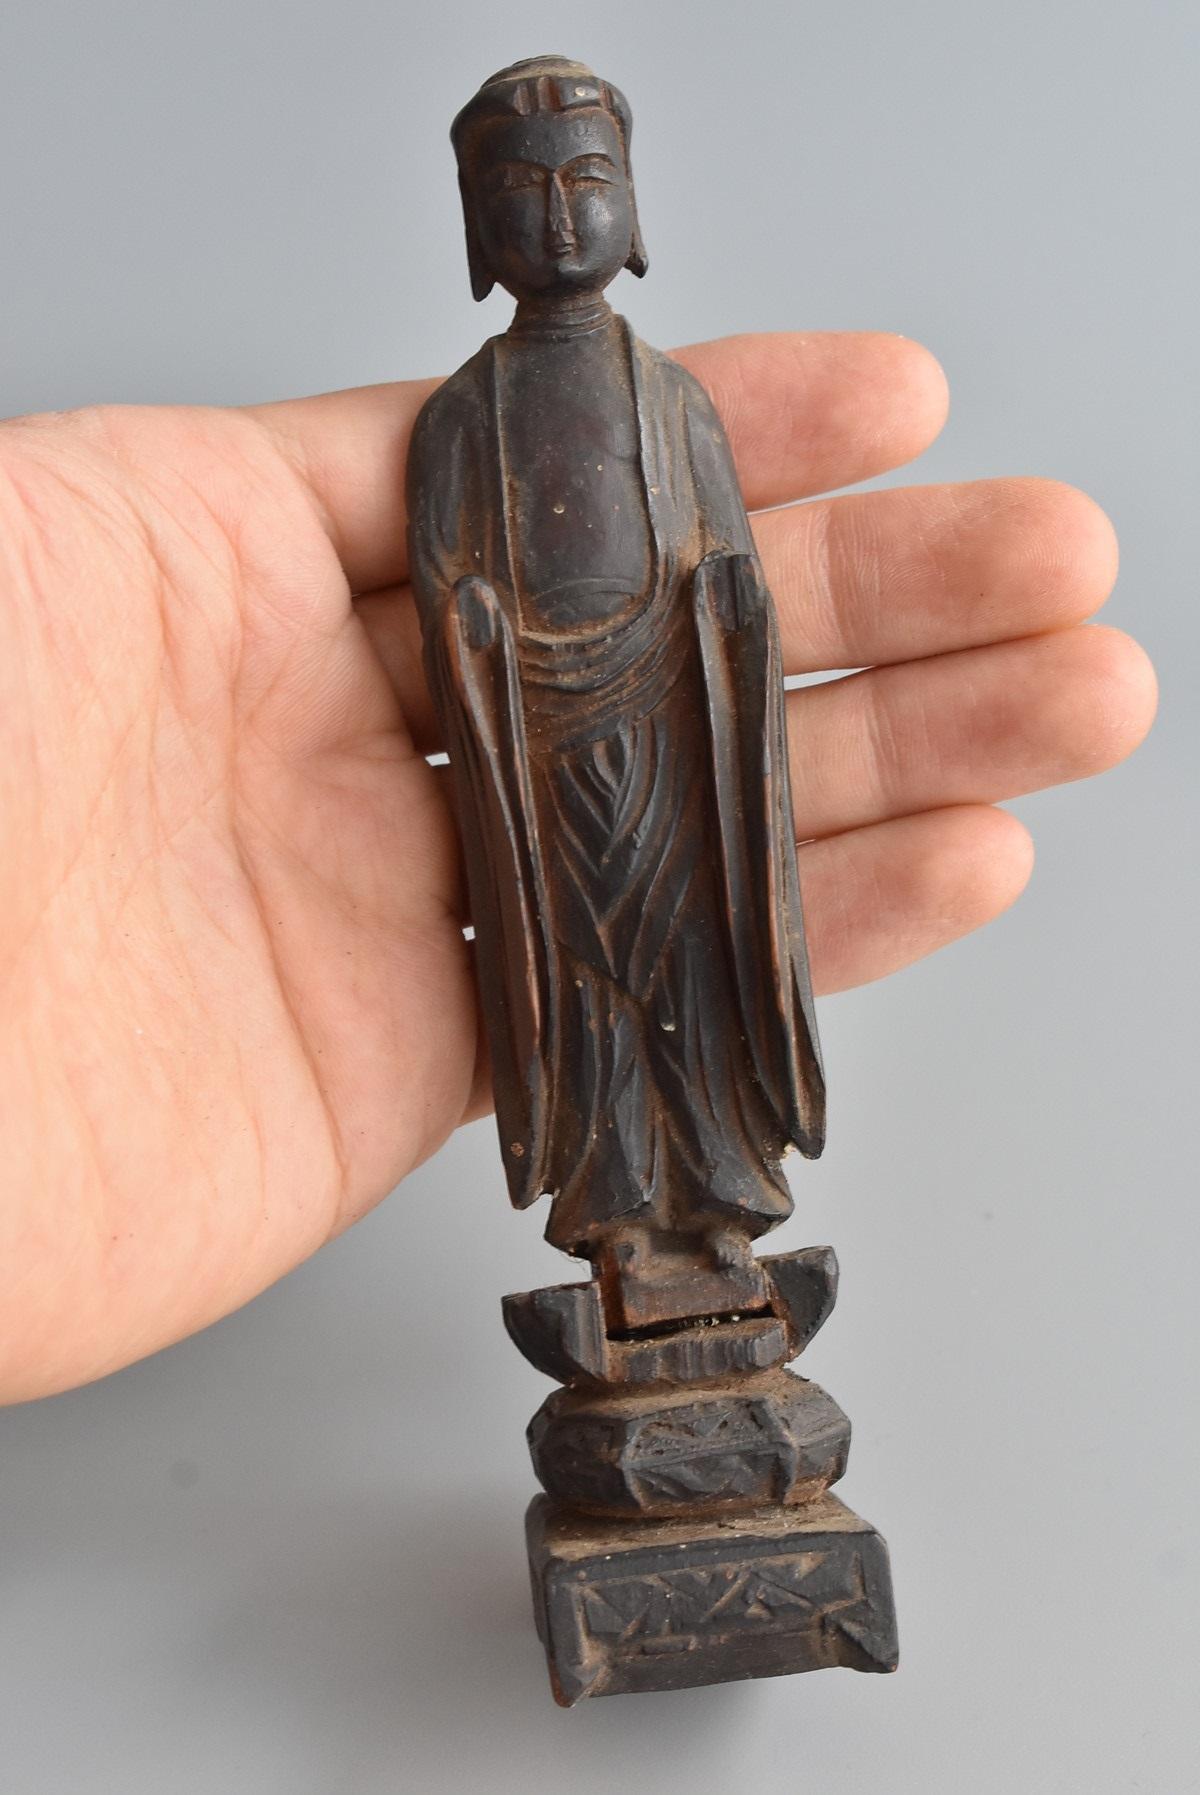 It is a wooden Buddha statue from the late Muromachi period to the early Edo period (1500 to 1600s).
I think this Buddha statue is Shaka Nyorai.
Shaka Nyorai is the highest rank of enlightened Buddhism.

It's a small Buddha statue, but it's very